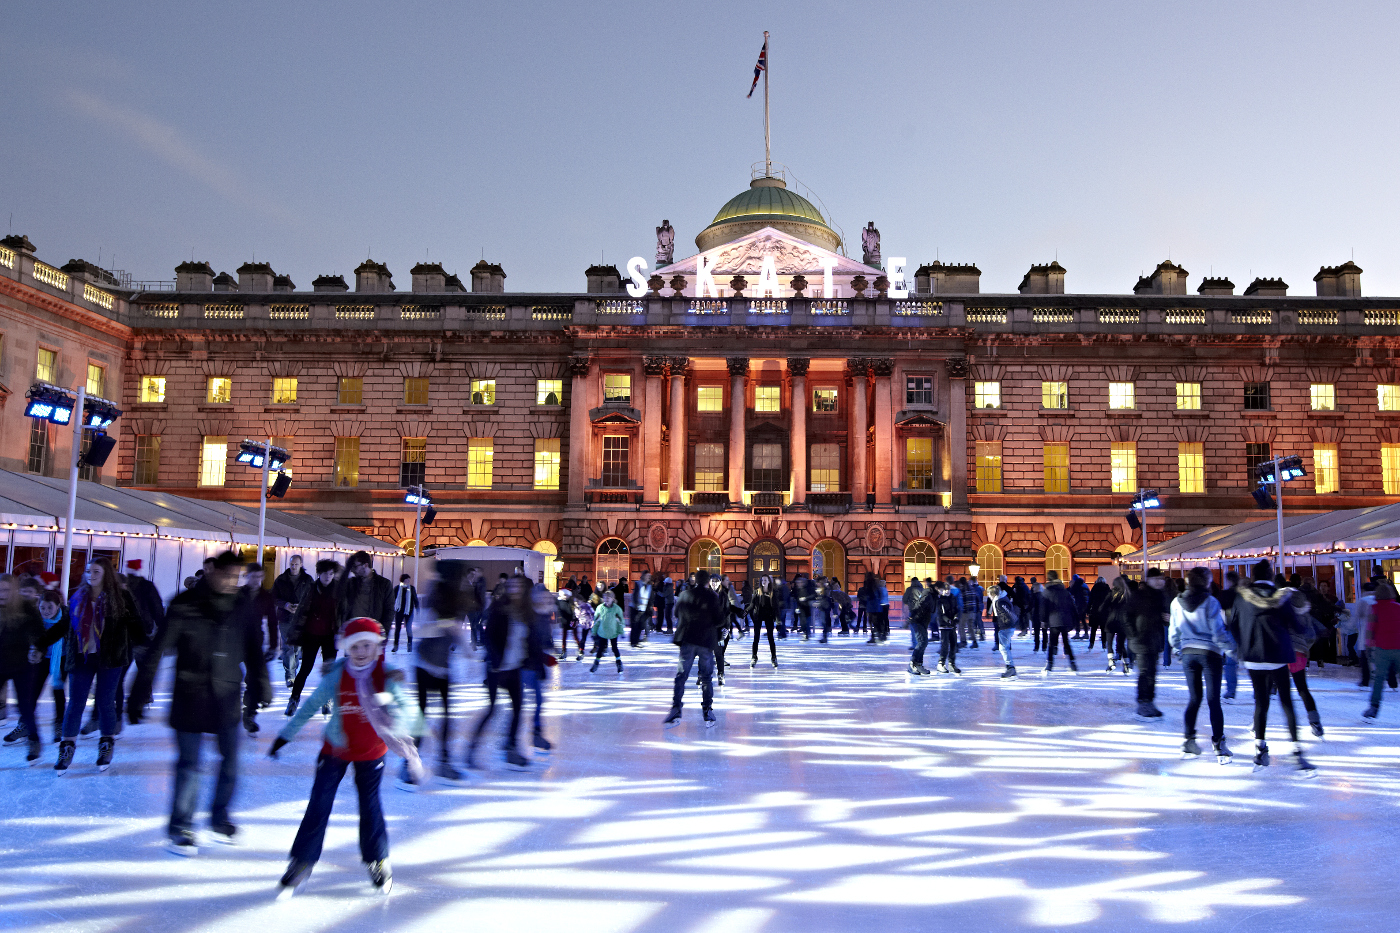 Skating at Somerset House. Image by Getty / Roger Cracknell Photography